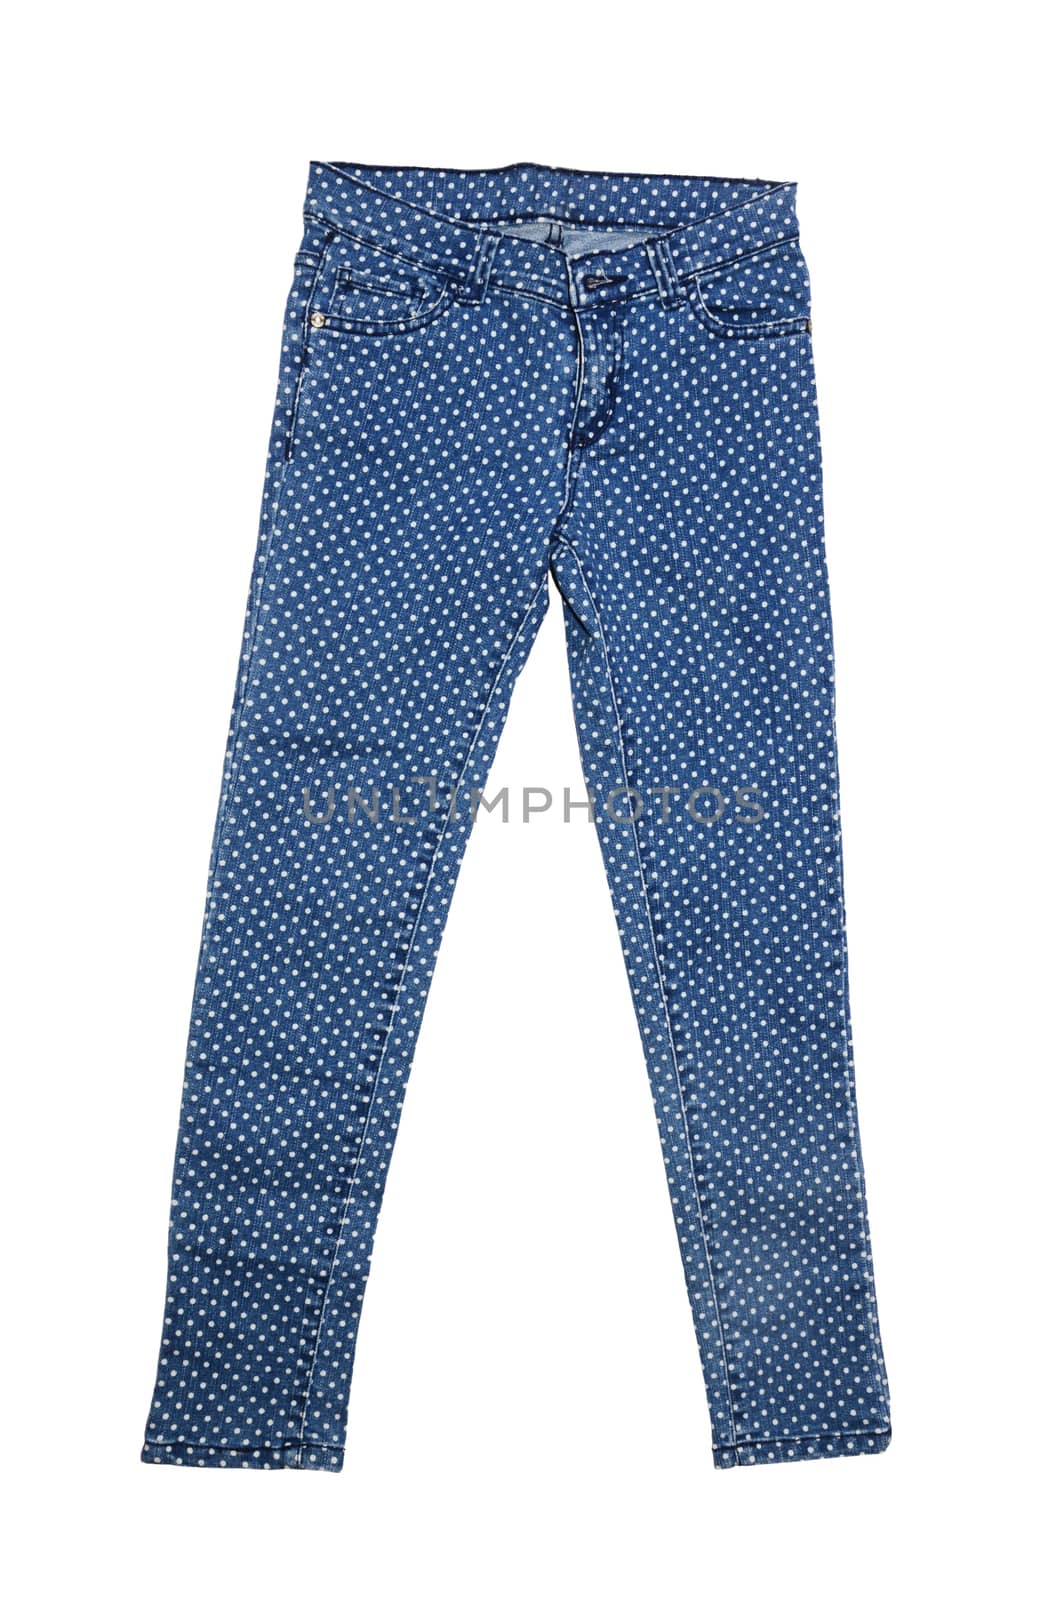 Blue female jeans isolated on white background